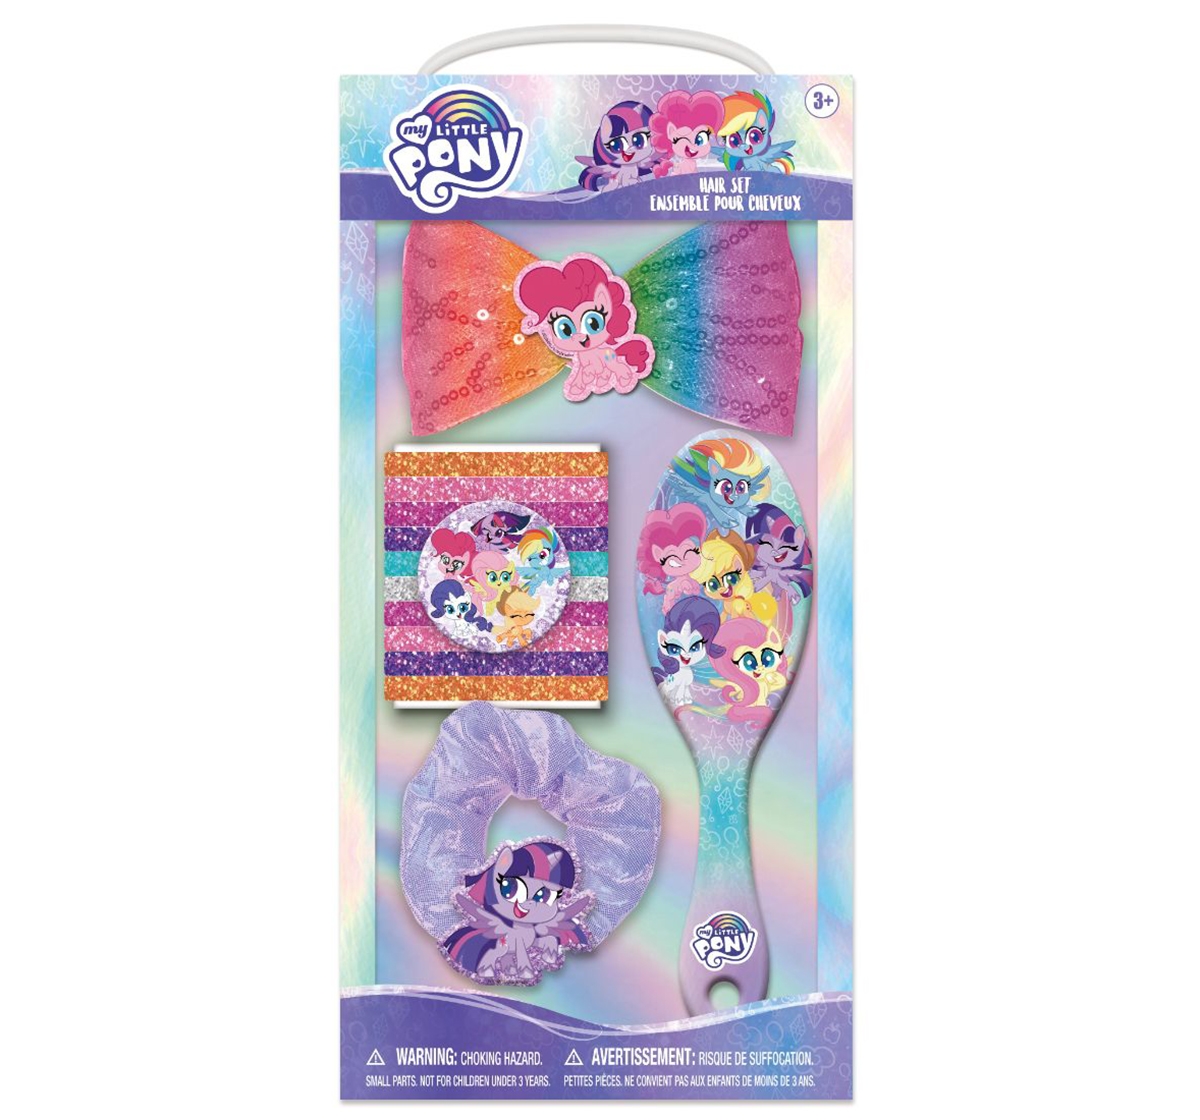 Townley Girl | NE My Little Pony Hair Accessories in Tin for Girls age 5Y+ 0